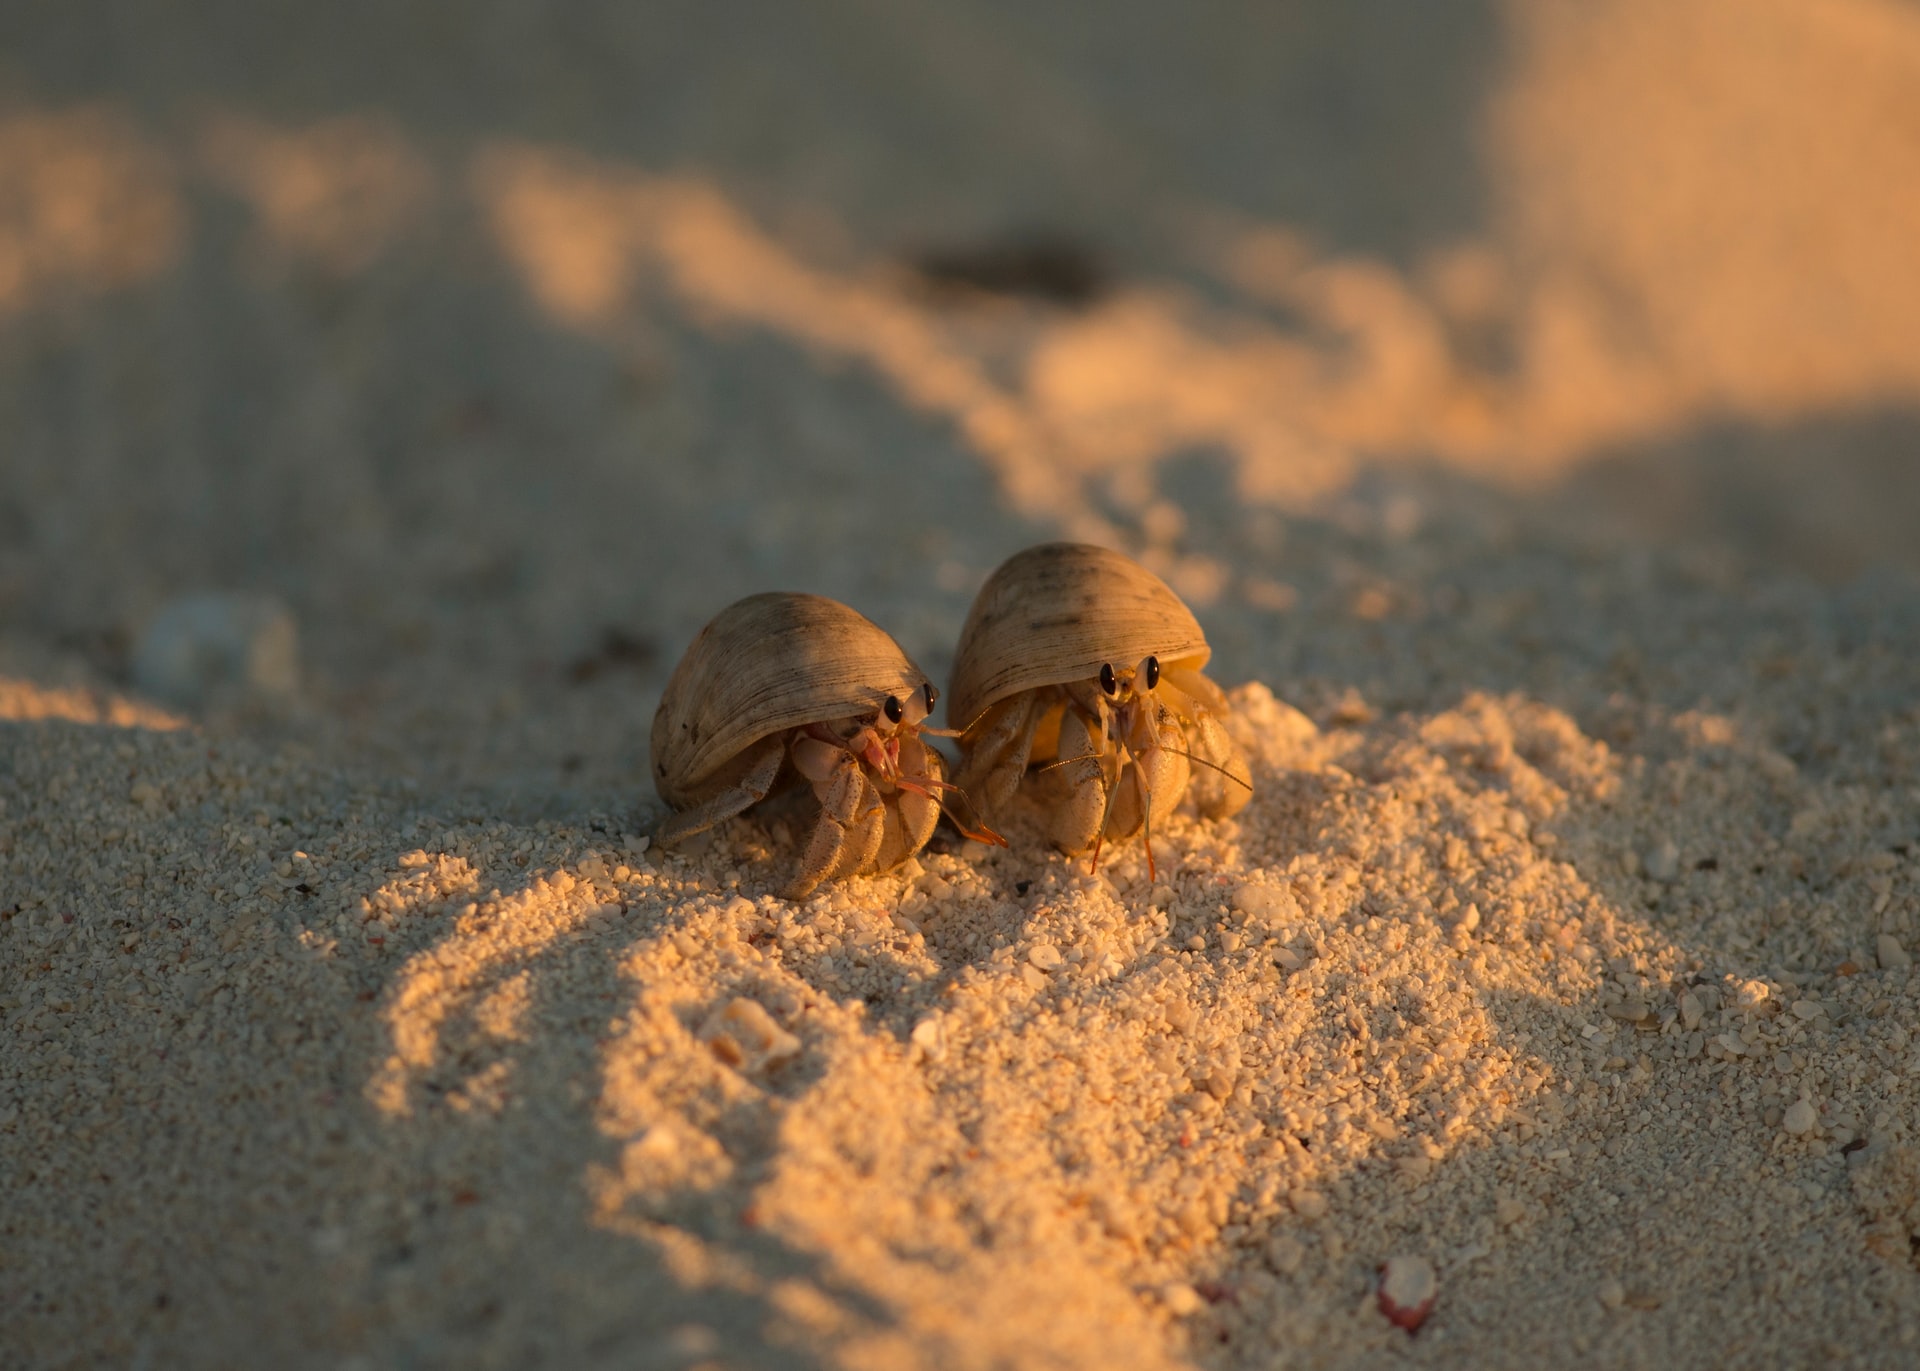 Hermit crab essays allow you to use ANYTHING as the "shell" of your writing